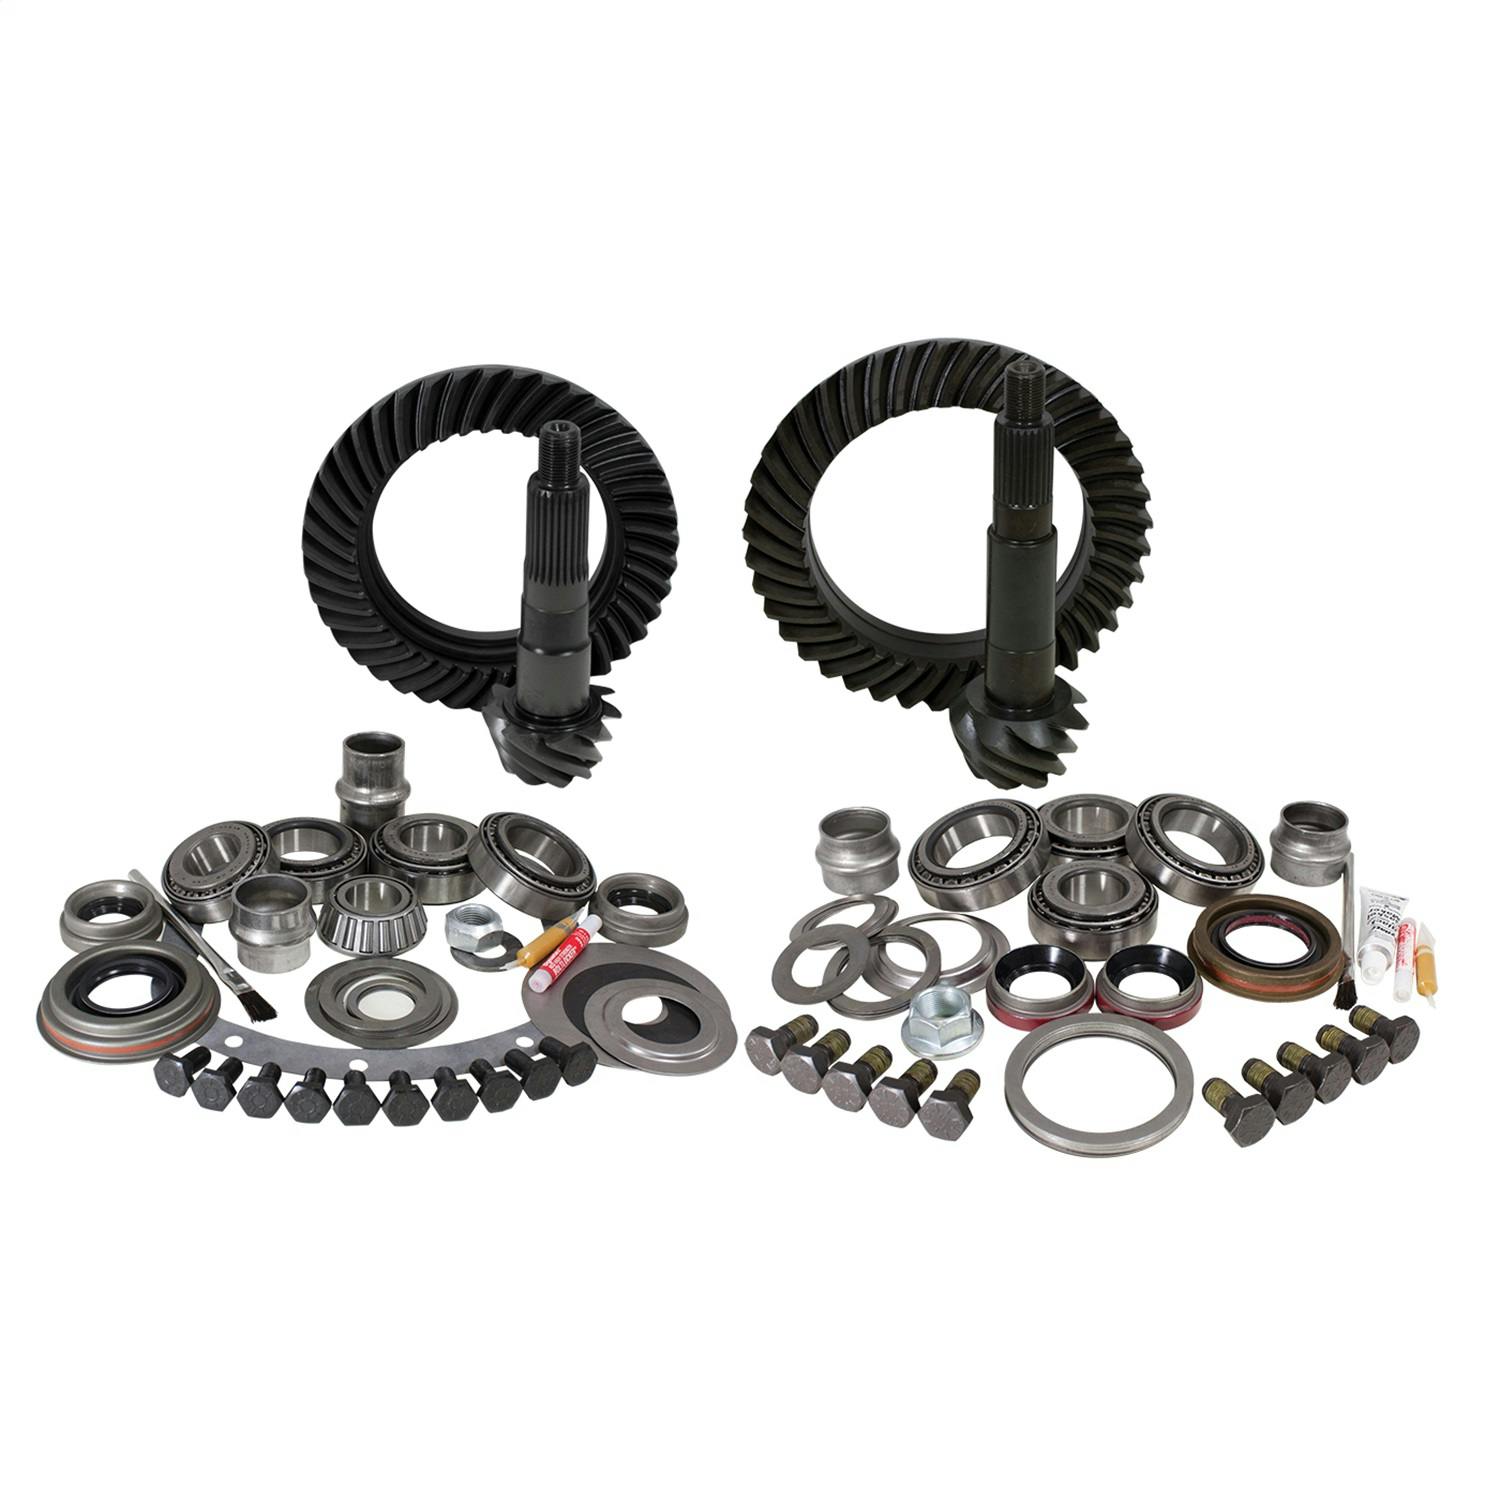 USA Standard Gear ZGK007 Ring And Pinion Set And Complete Install Kit